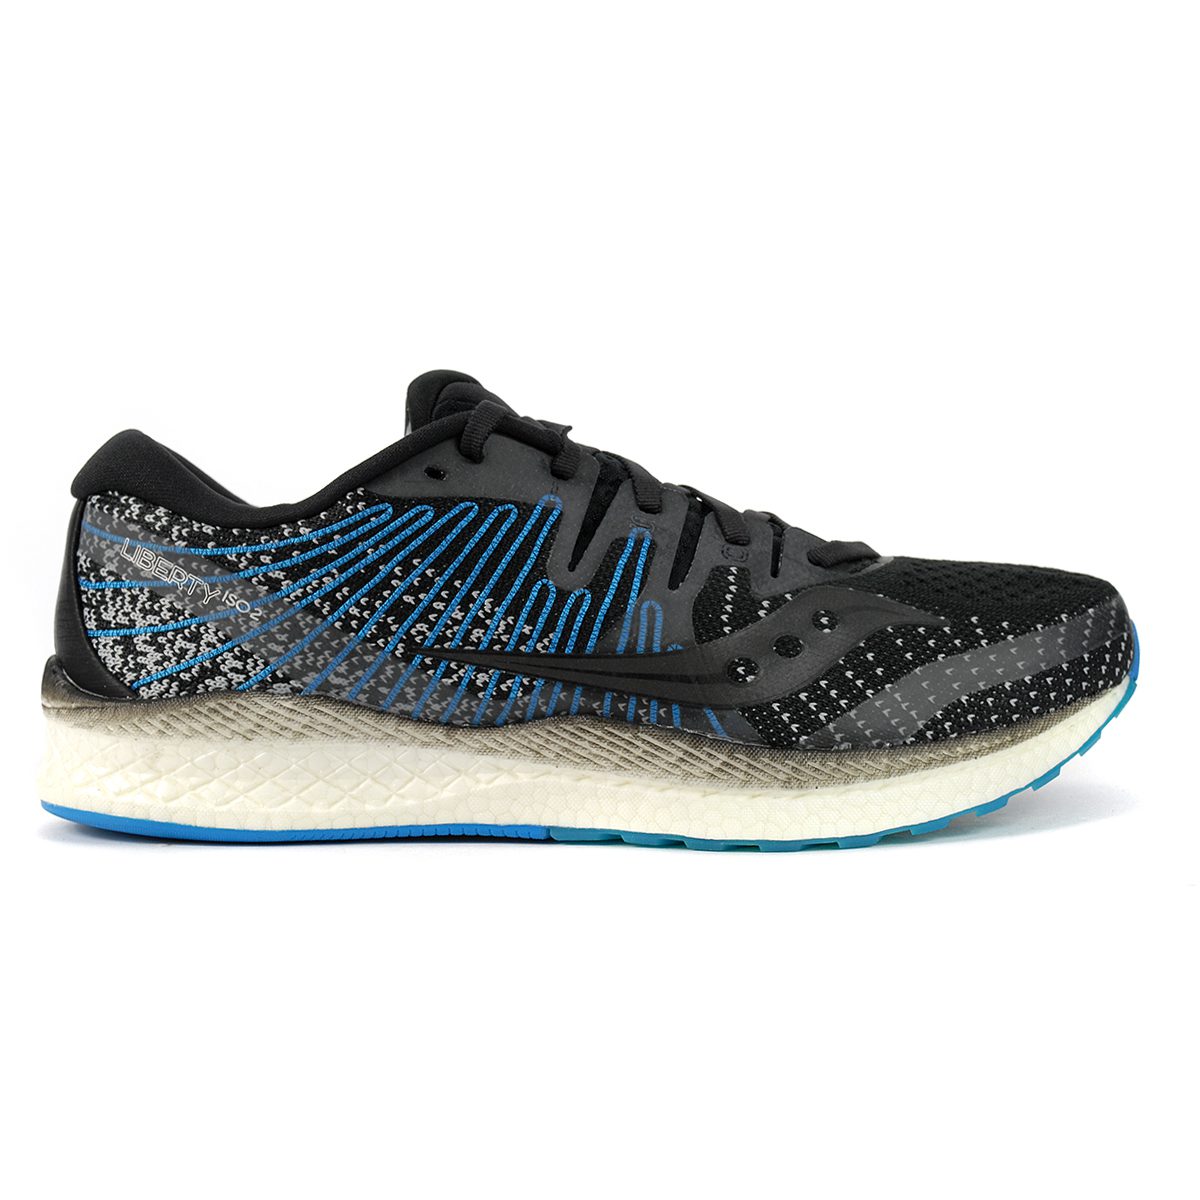 Blue Saucony Liberty ISO Mens Running Shoes 